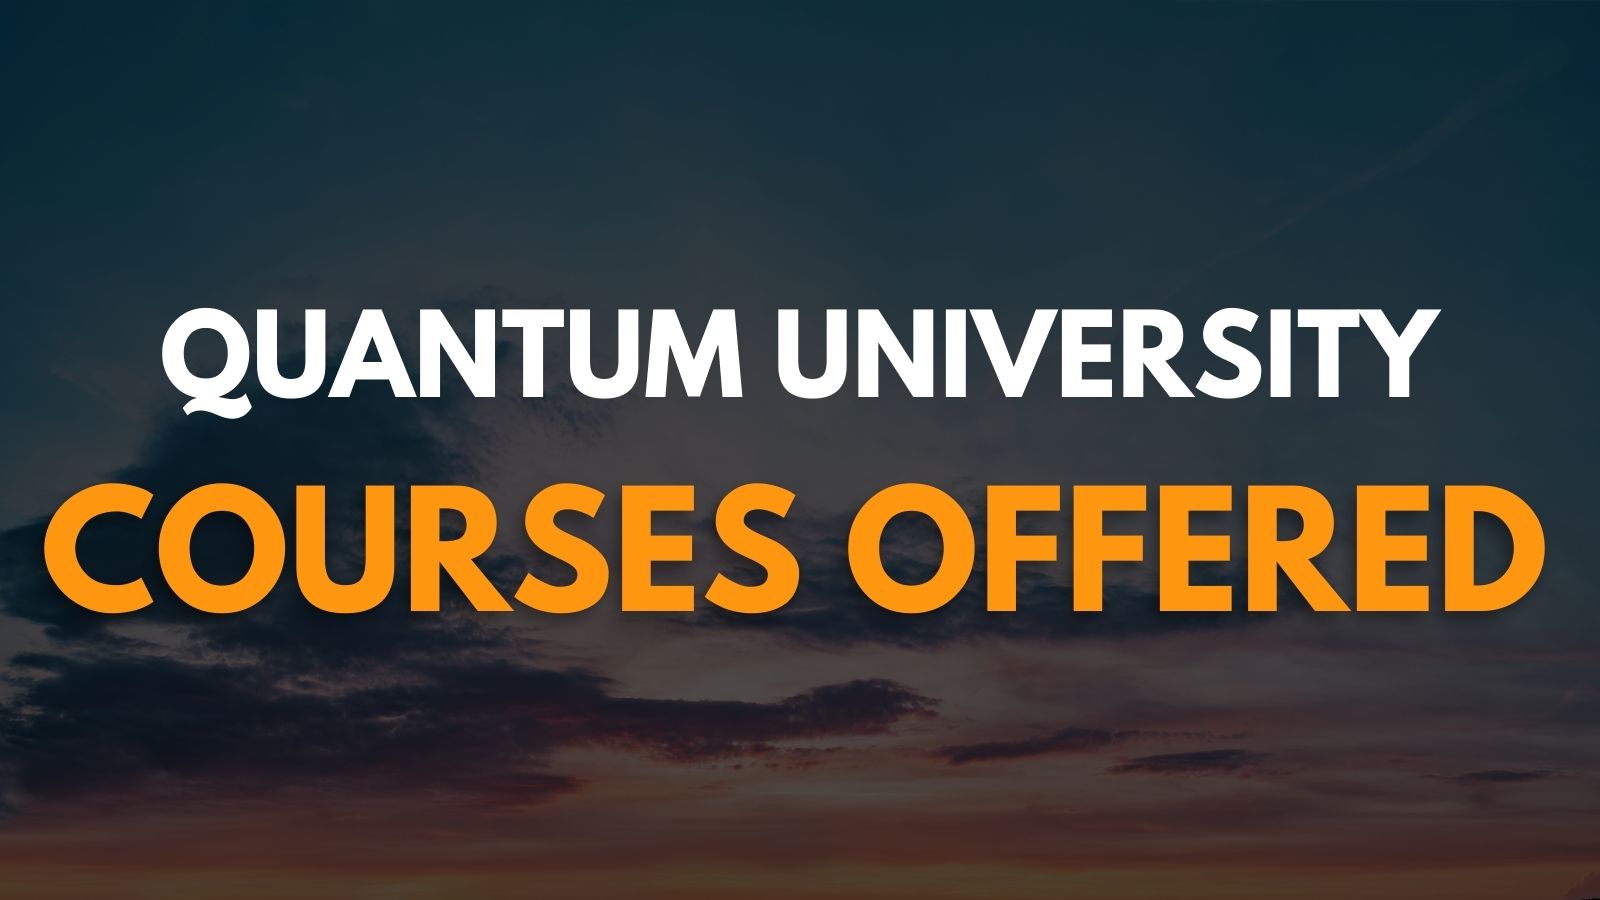 Courses Offered By Quantum University